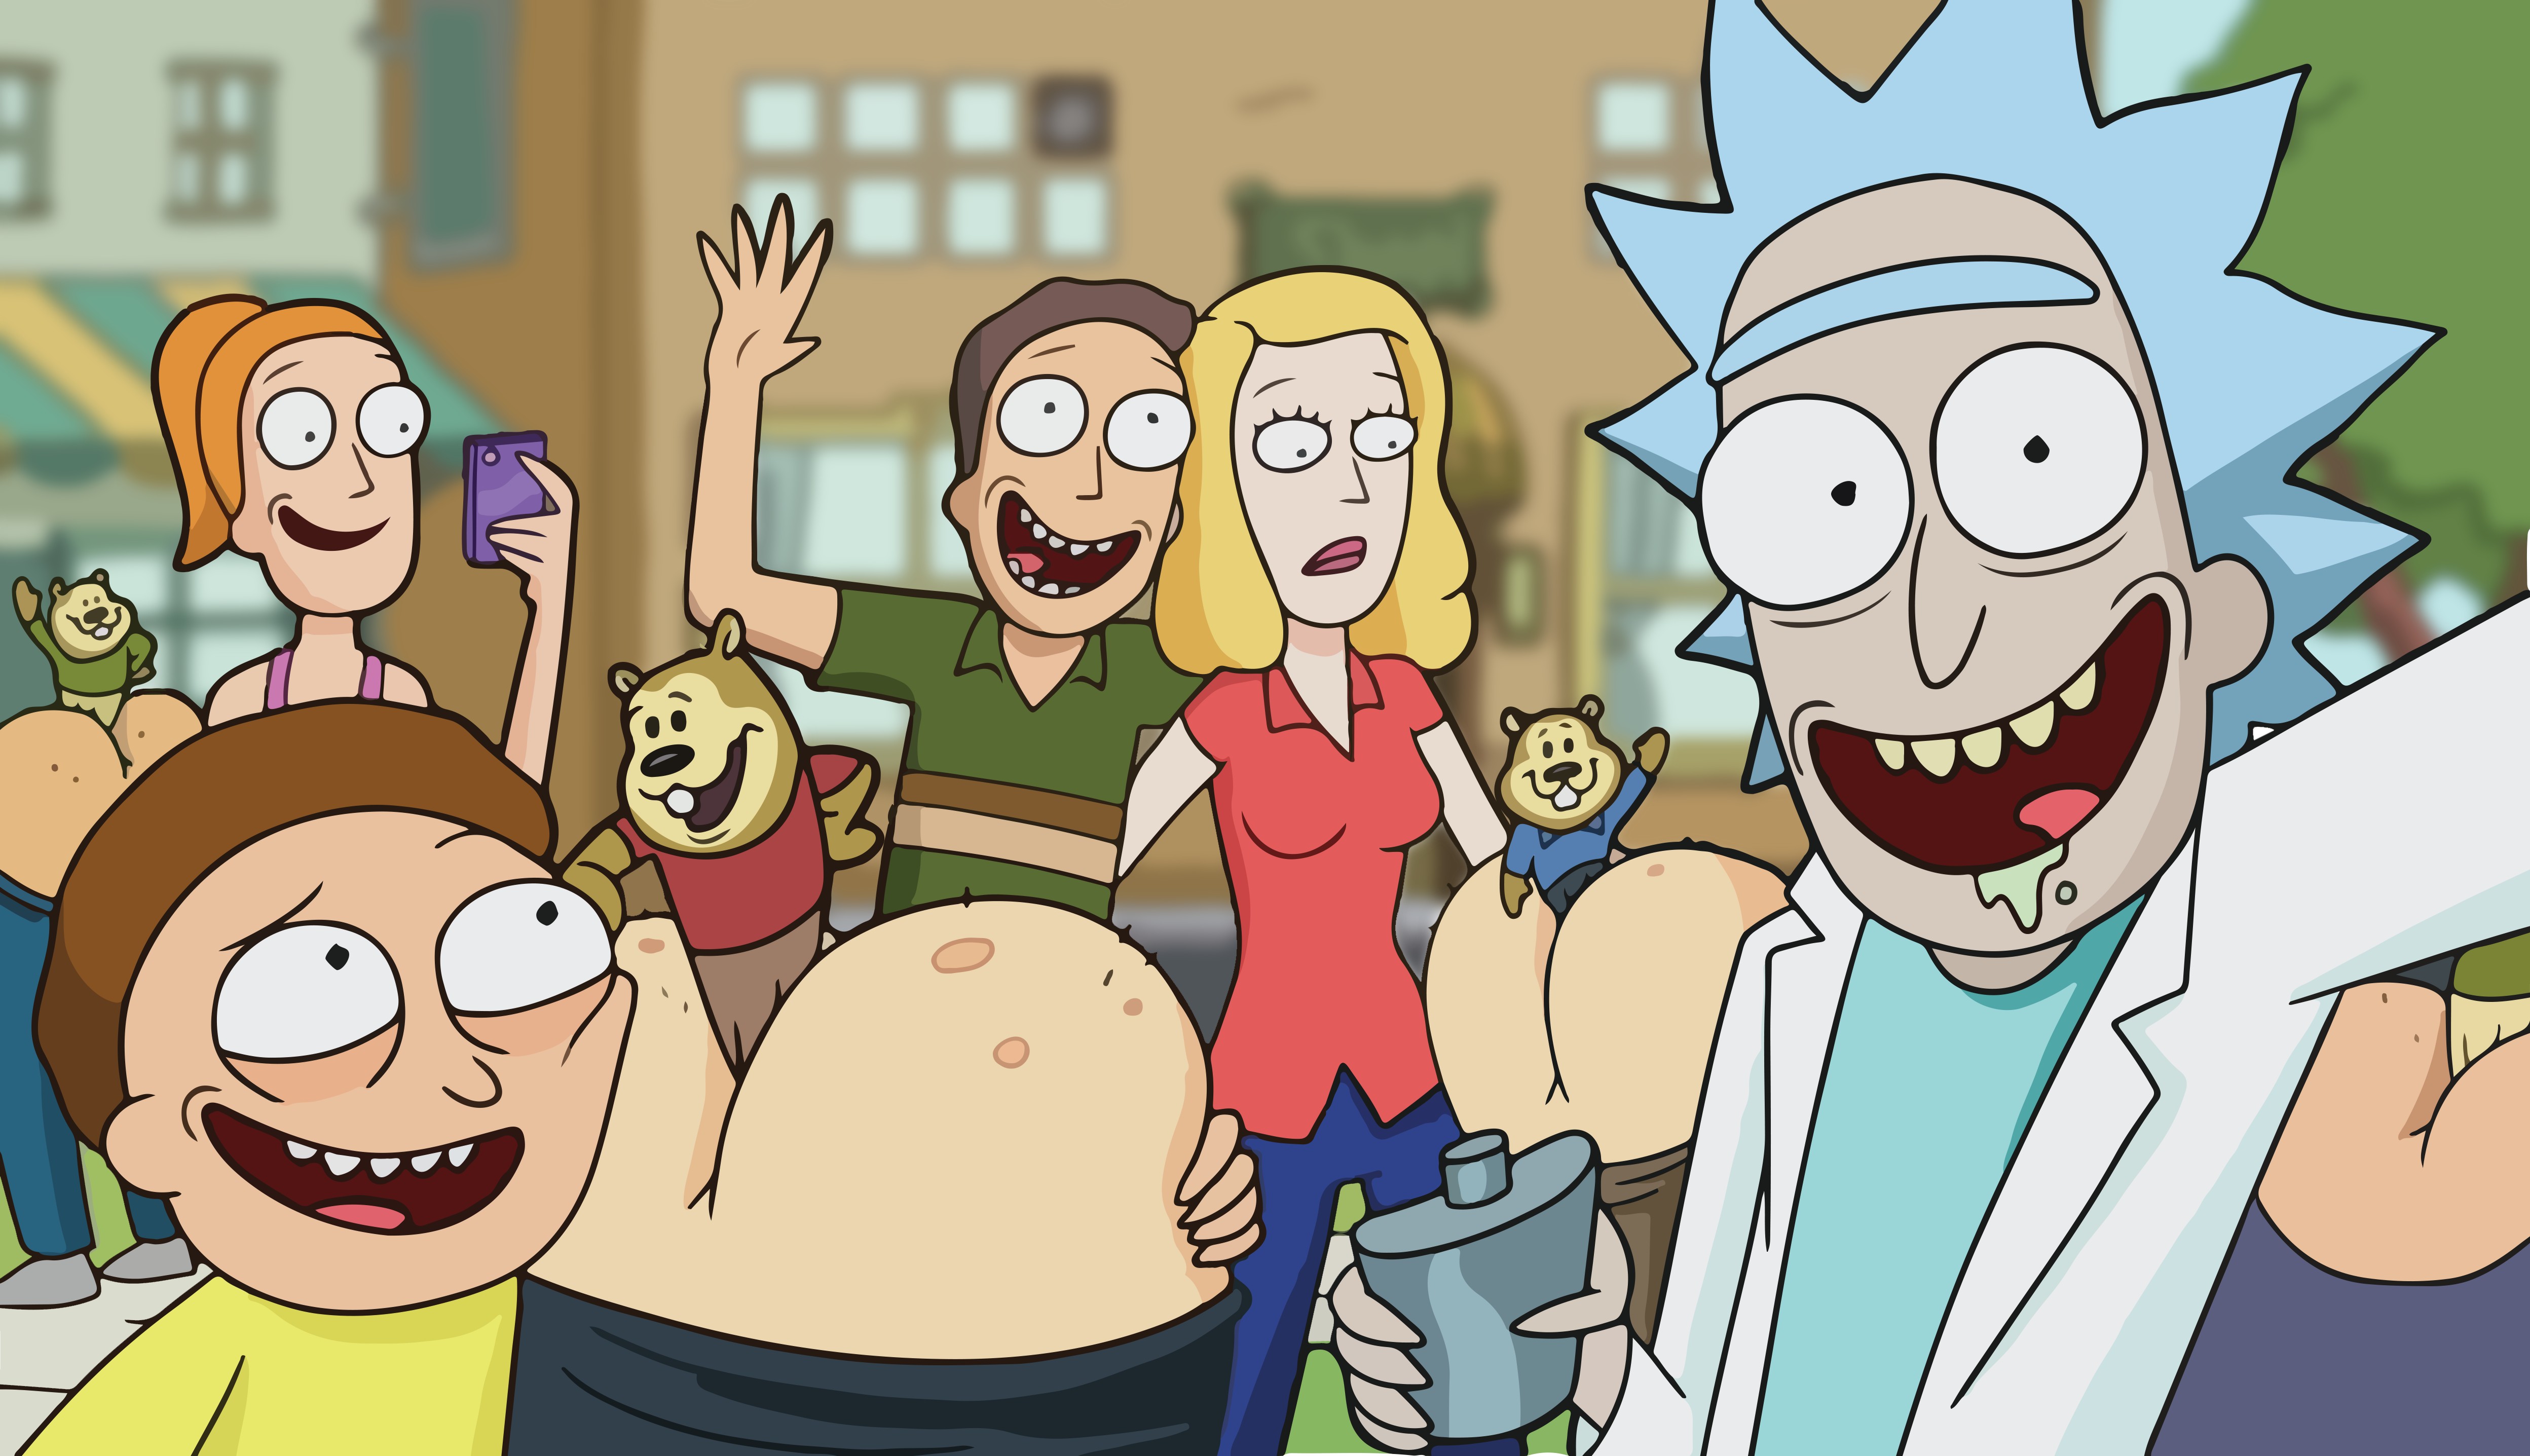 Rick Sanchez, Morty Smith, Jerry Smith, Summer Smith, Beth Smith, Rick and Morty, TV, Adult Swim Wallpaper